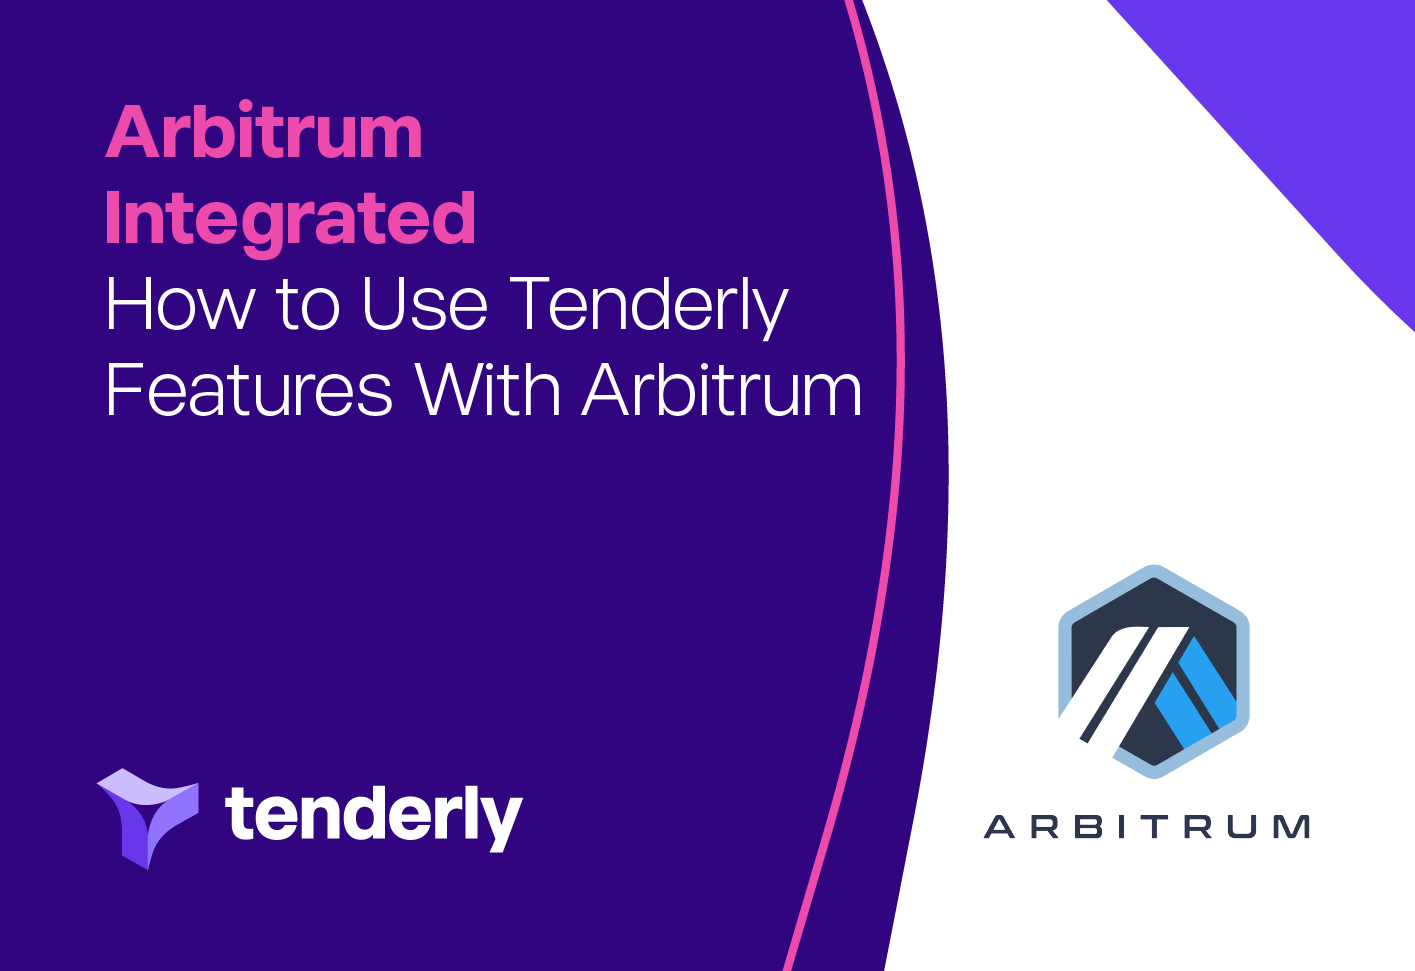 Tenderly’s Full Integration With Arbitrum: How to Make the Most of It